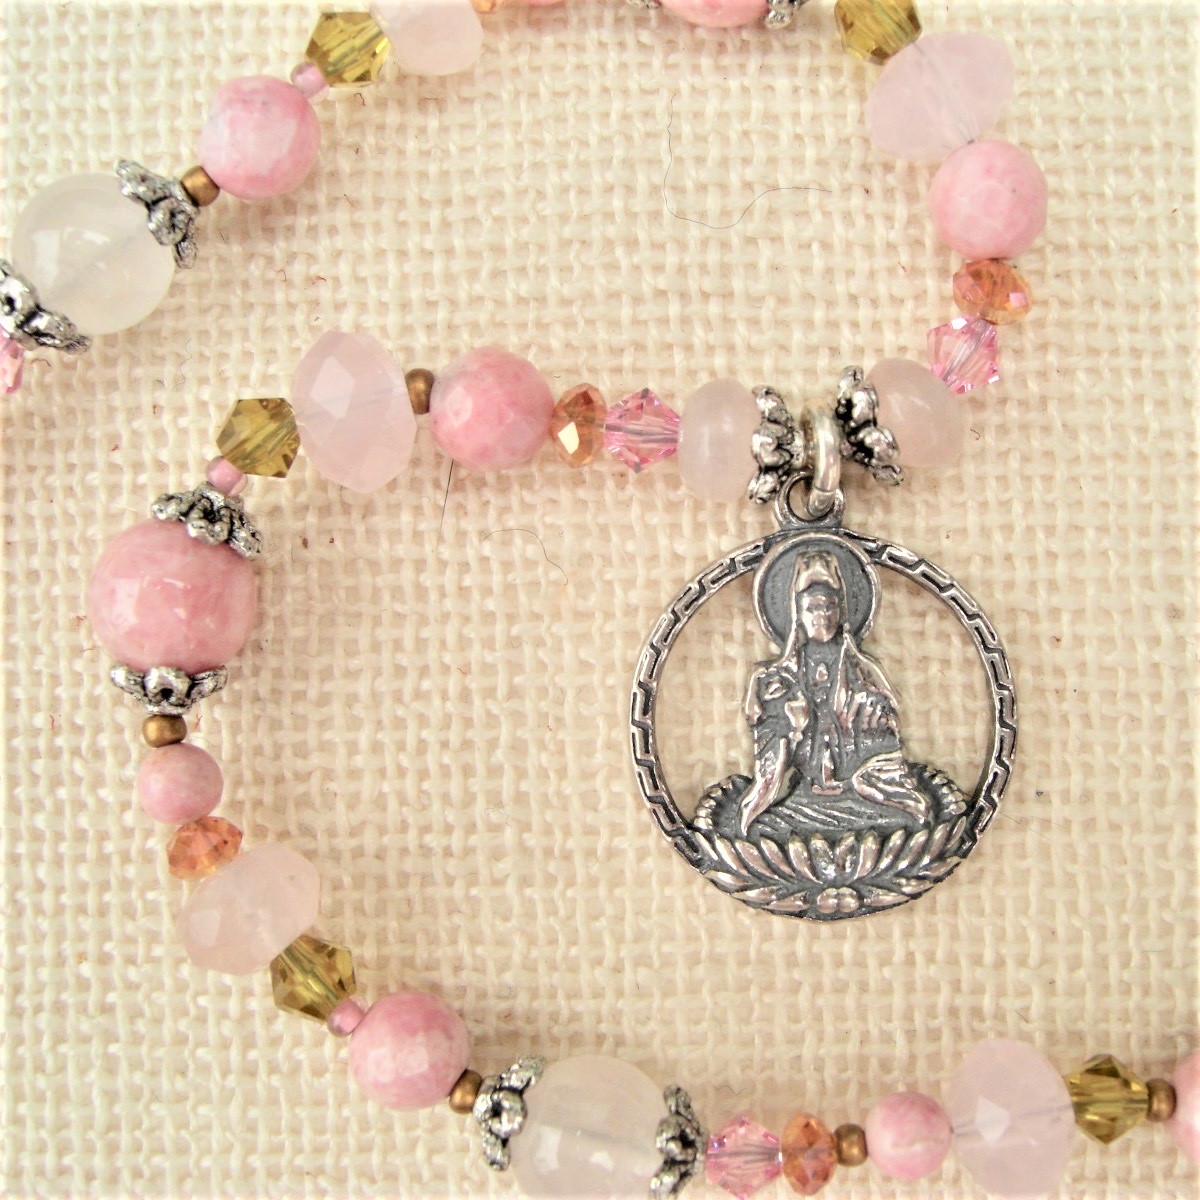 Compassion Necklace Goddess Necklace Crystal Healing Quan Yin Necklace Kuan Yin Necklace Goddess of Mercy Rose Quartz Necklace